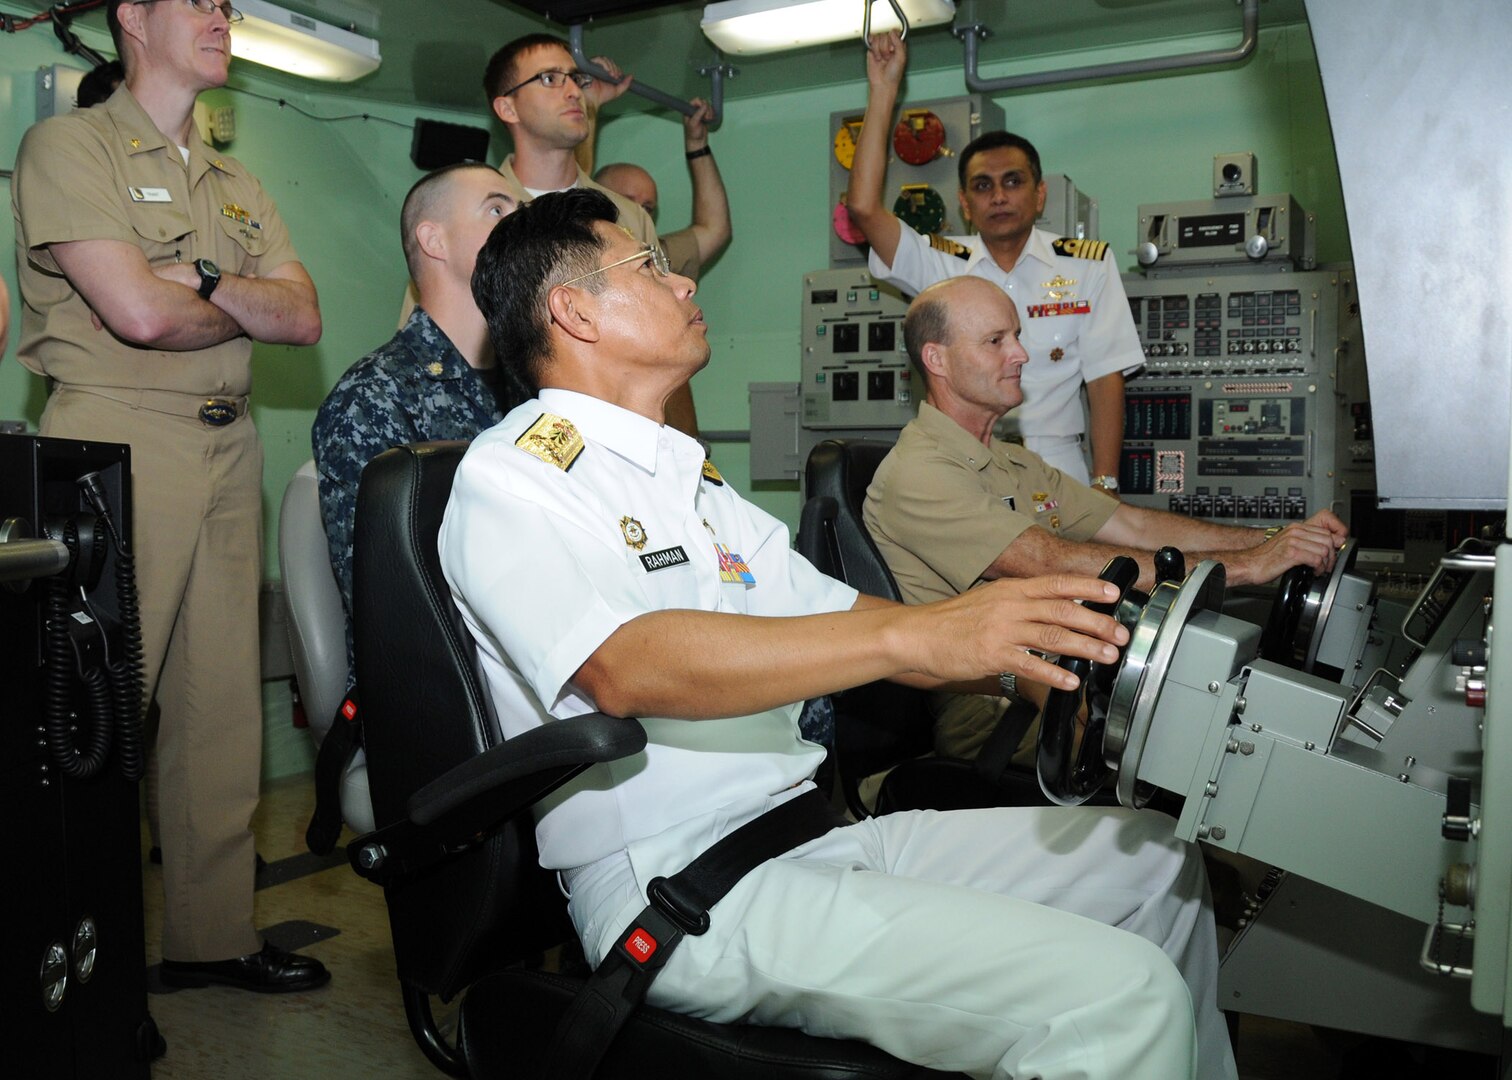 Rear Adm. Abdul Rahman, commander, Royal Malaysian Navy Submarine Force, center, and Rear Adm. William Merz, commander, Submarine Group Seven, operate a submarine dive simulator during a tour of submarine training facilities at Submarine Squadron 15, Dec 1. The simulator was just one of many scheduled events centered around submarine staff talks between the two nations. The purpose of the talks was to discuss various opportunities were the submarine forces of both nations can train and exercise together.